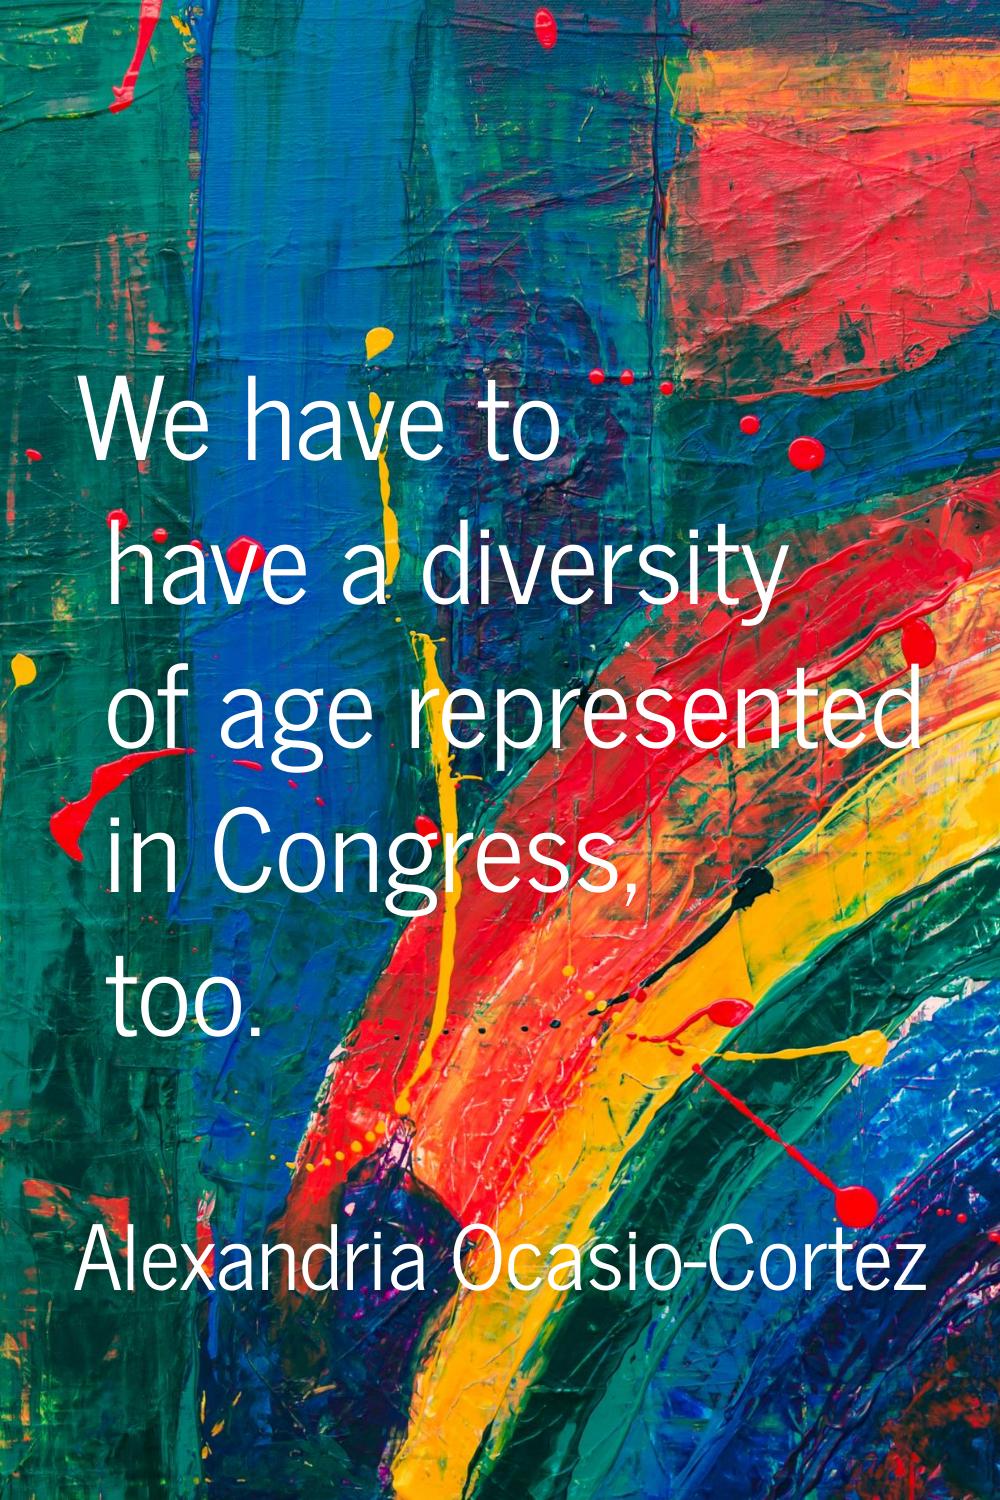 We have to have a diversity of age represented in Congress, too.